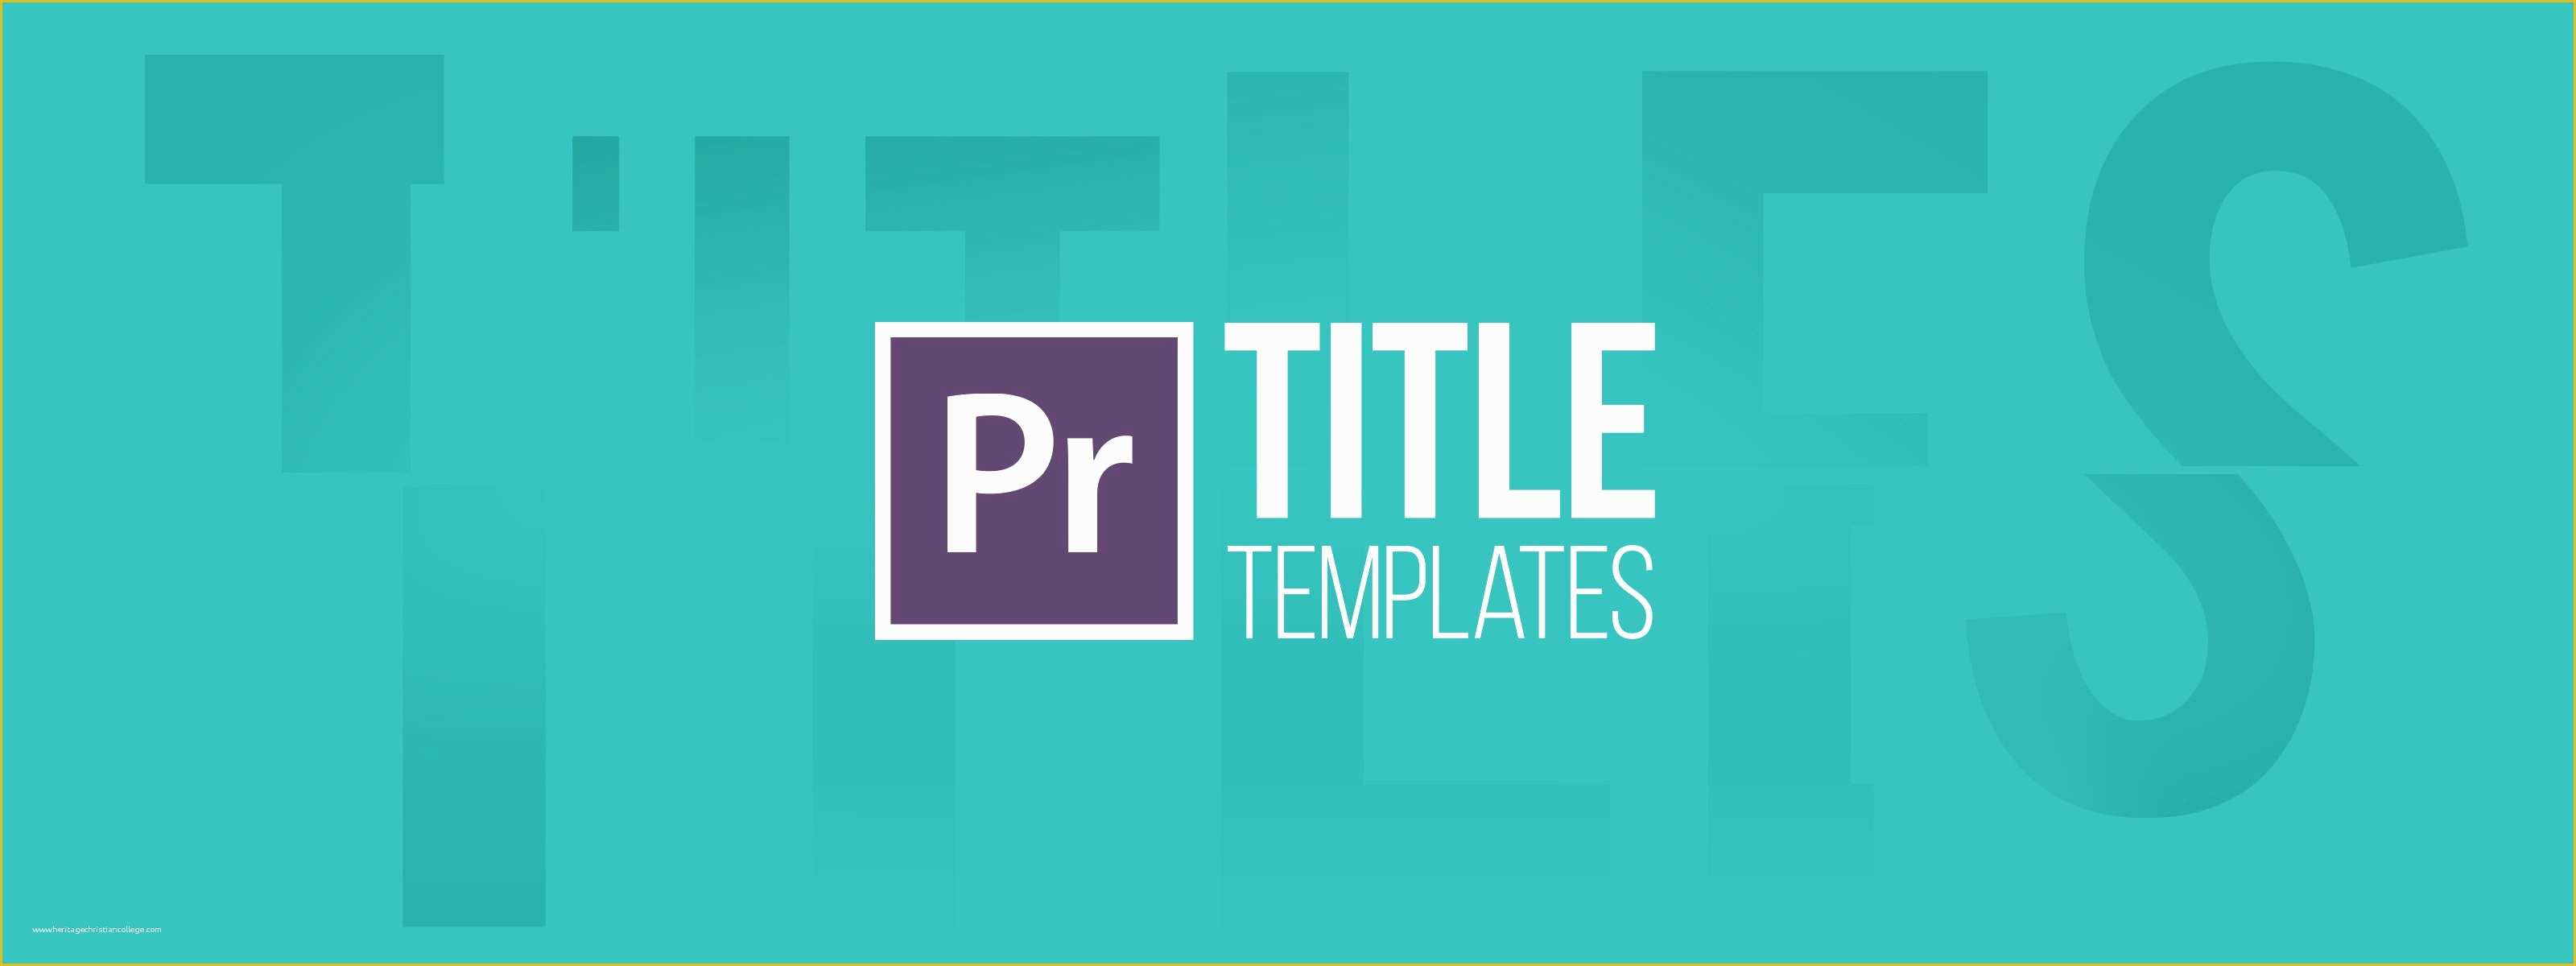 Adobe Premiere Templates Free Of Learn How to Use Our Premiere Pro Title Templates